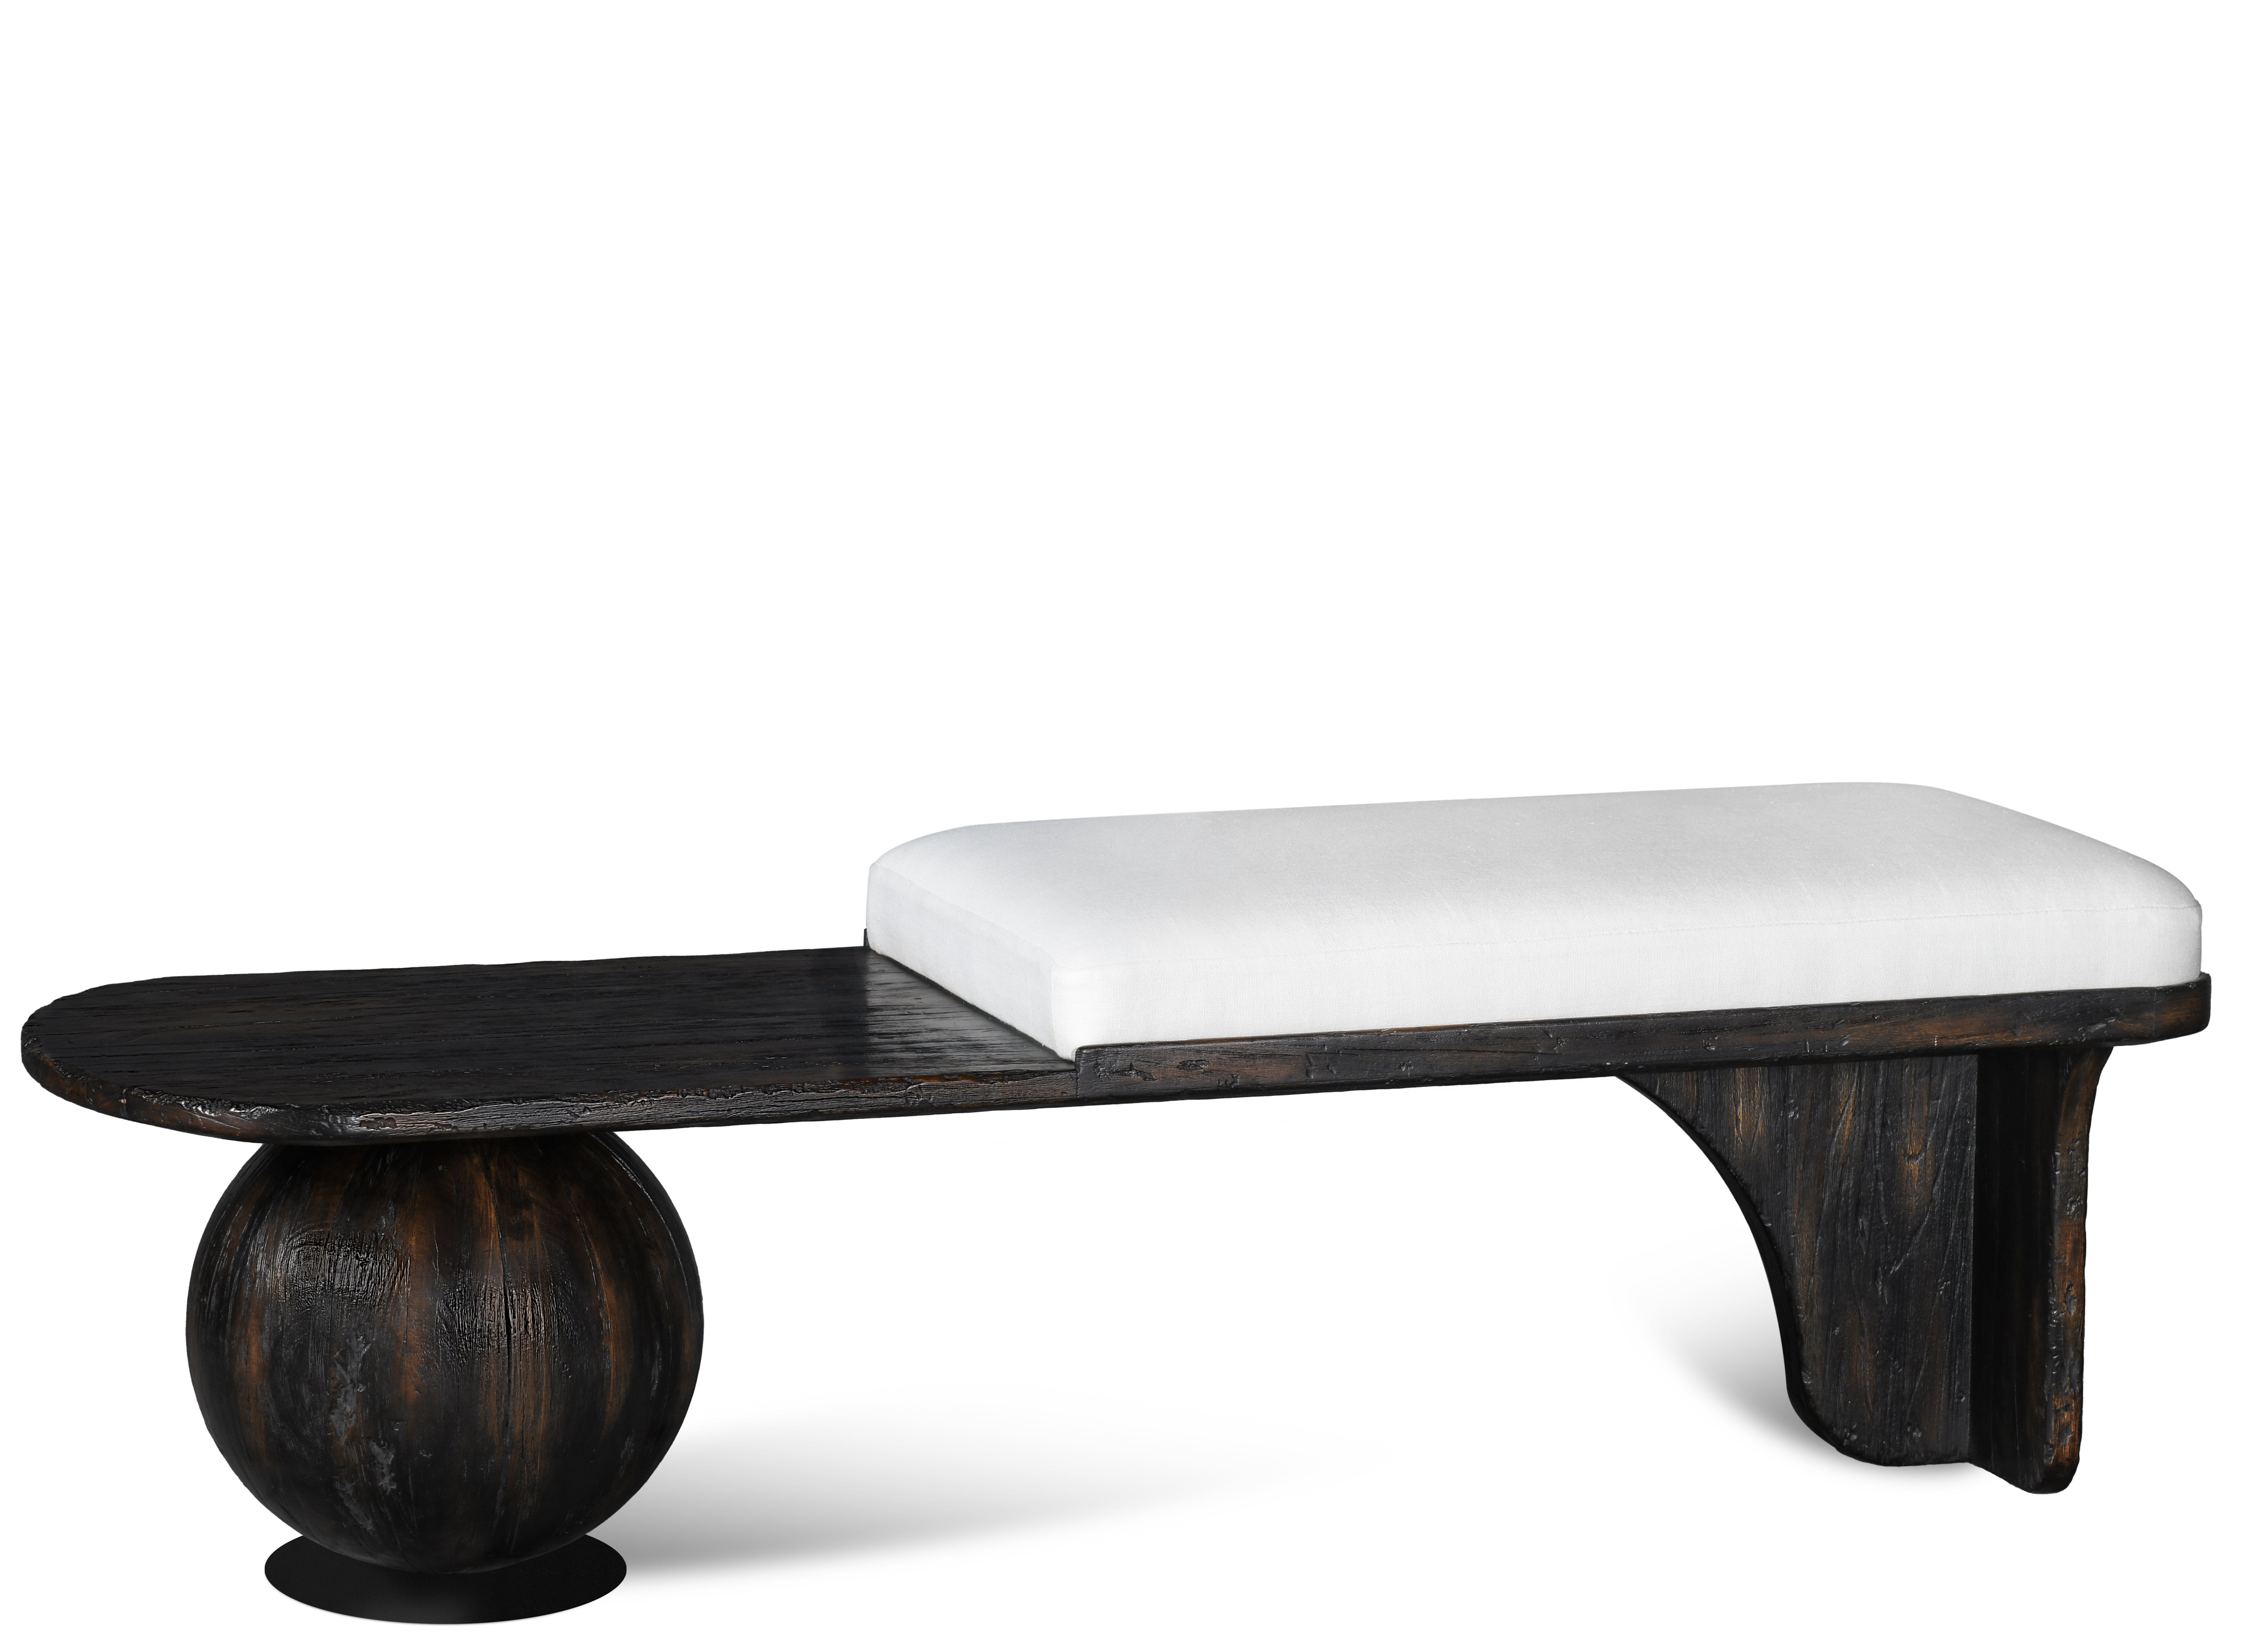 Asymmetrical wood Evran bench with a sphere and solid leg For Sale